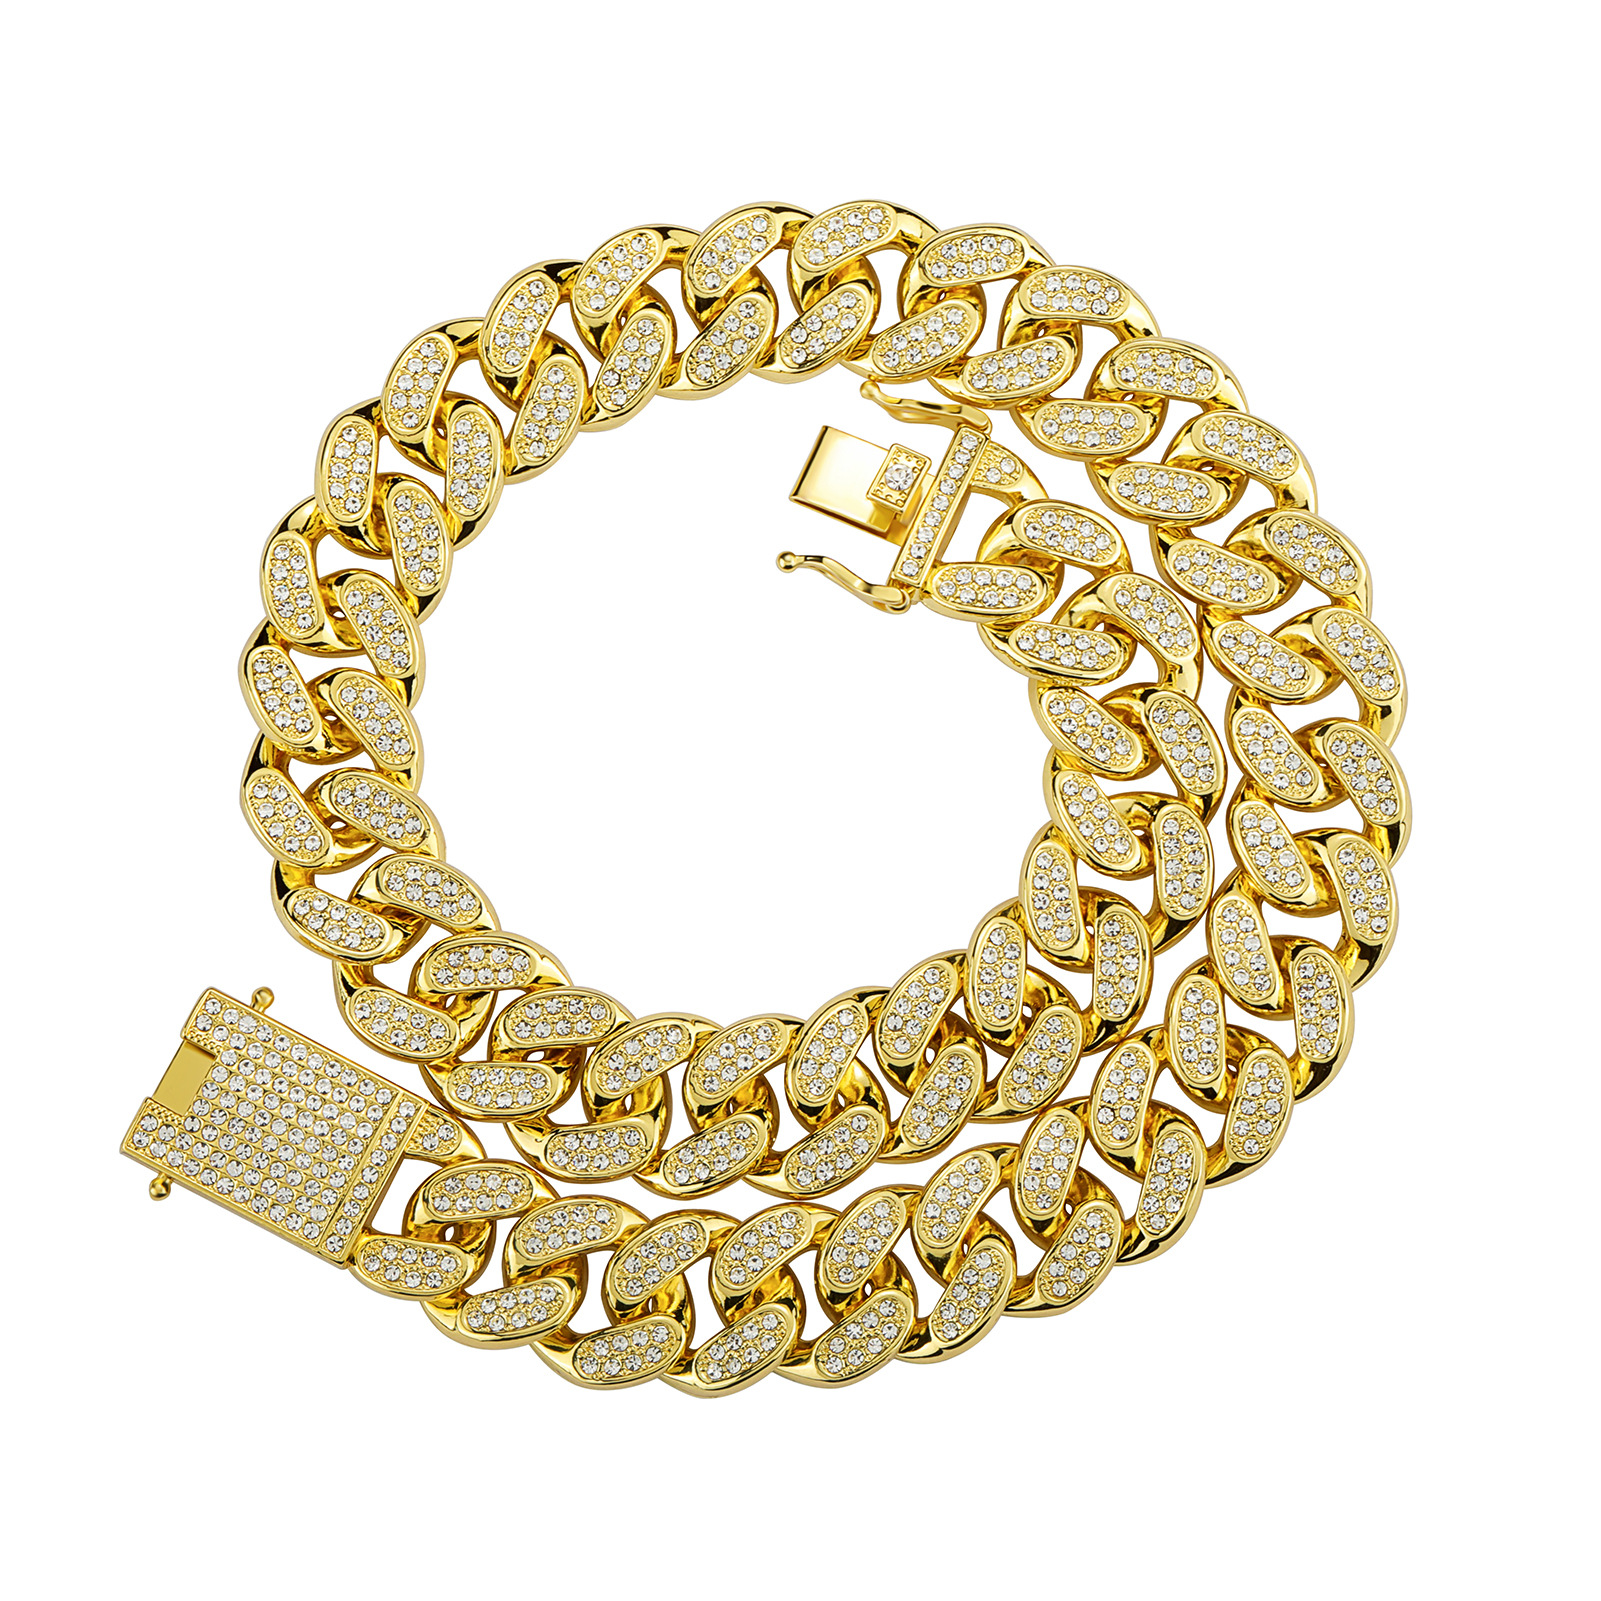 2:Necklace gold 18 inch